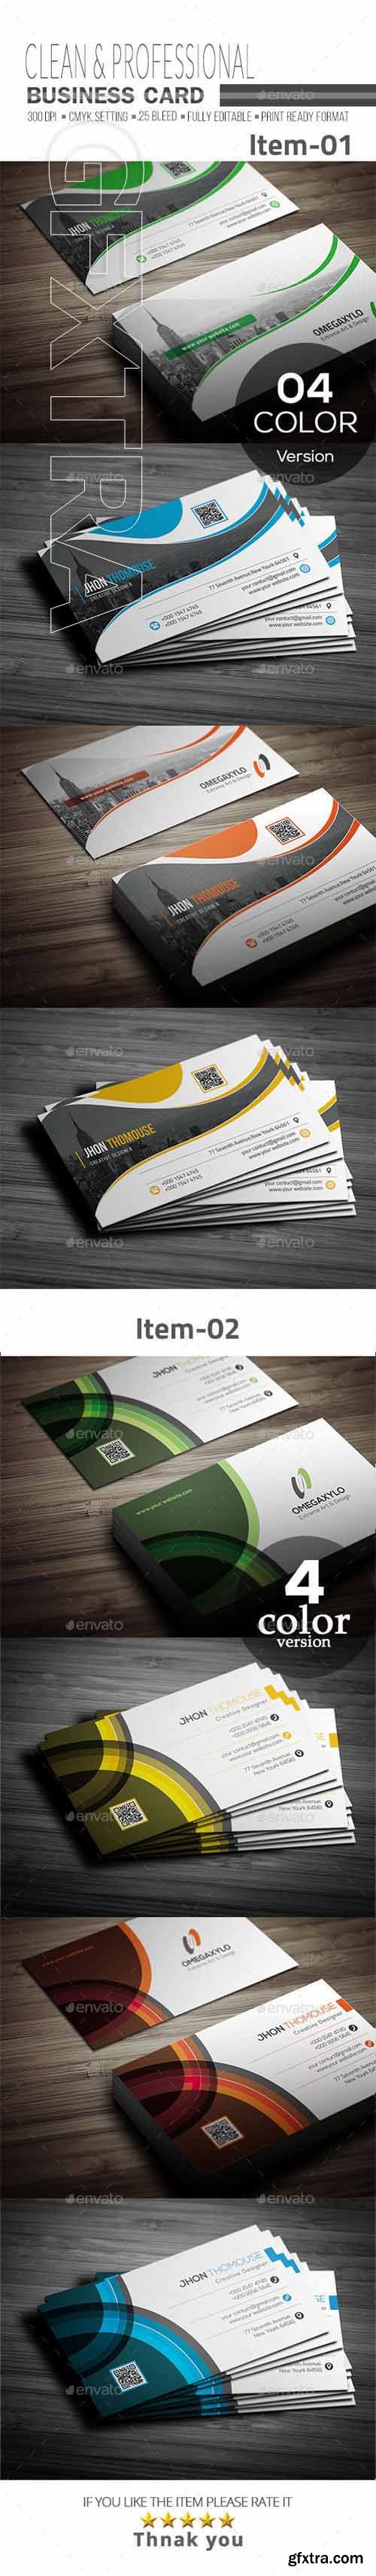 GraphicRiver - Business Card Bundle 2 In 1 20657894